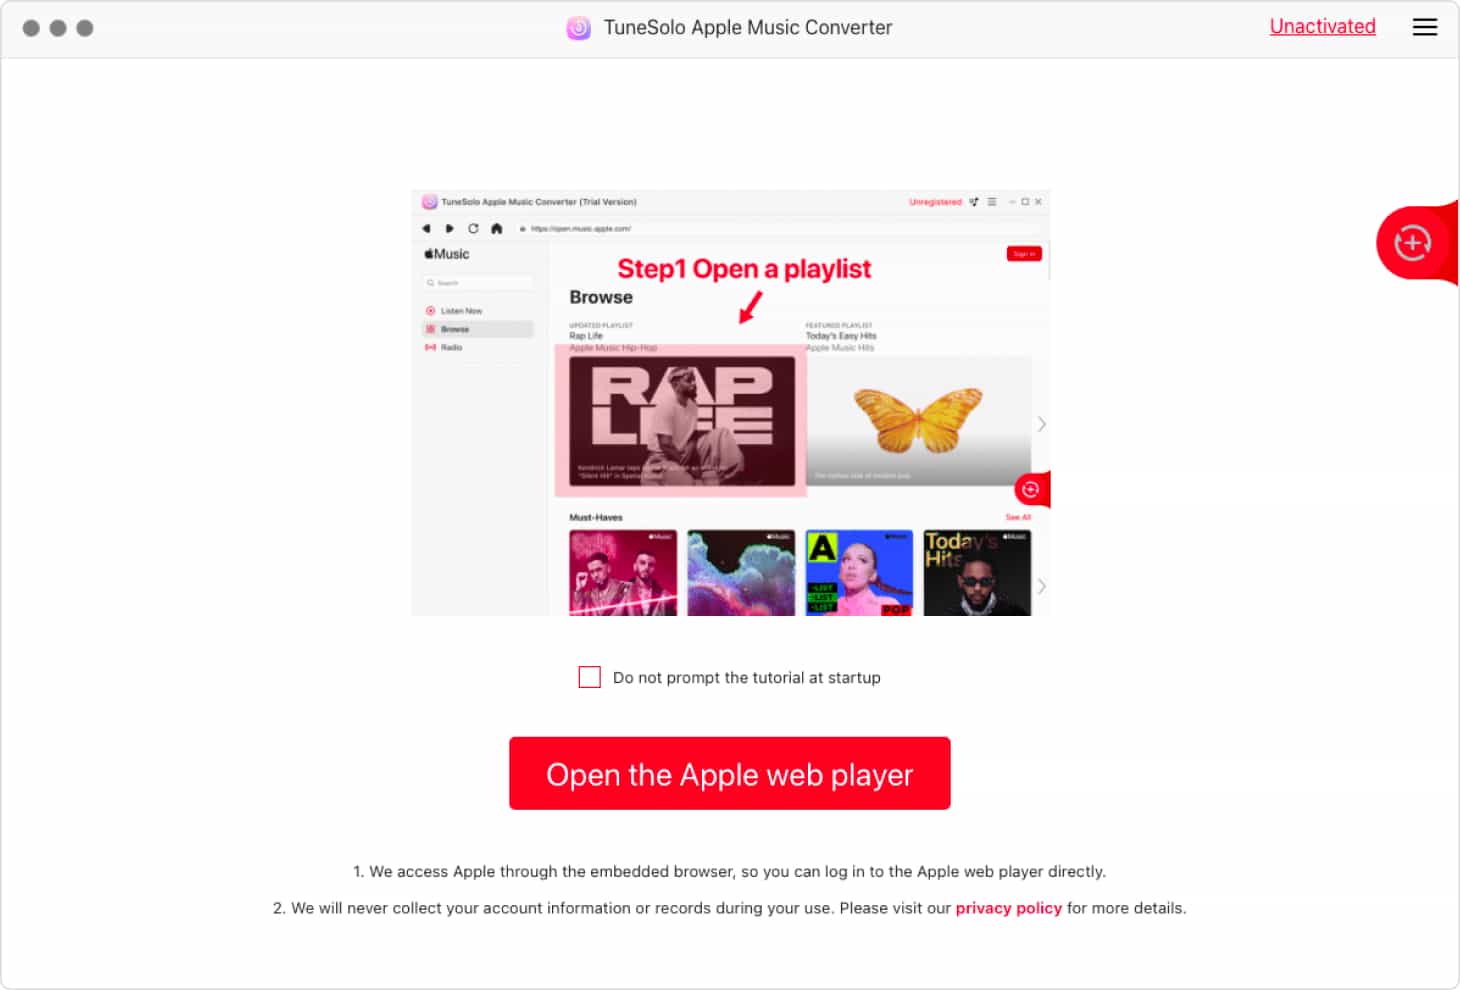 Share Apple Music with Family for Free Using Tunesolo